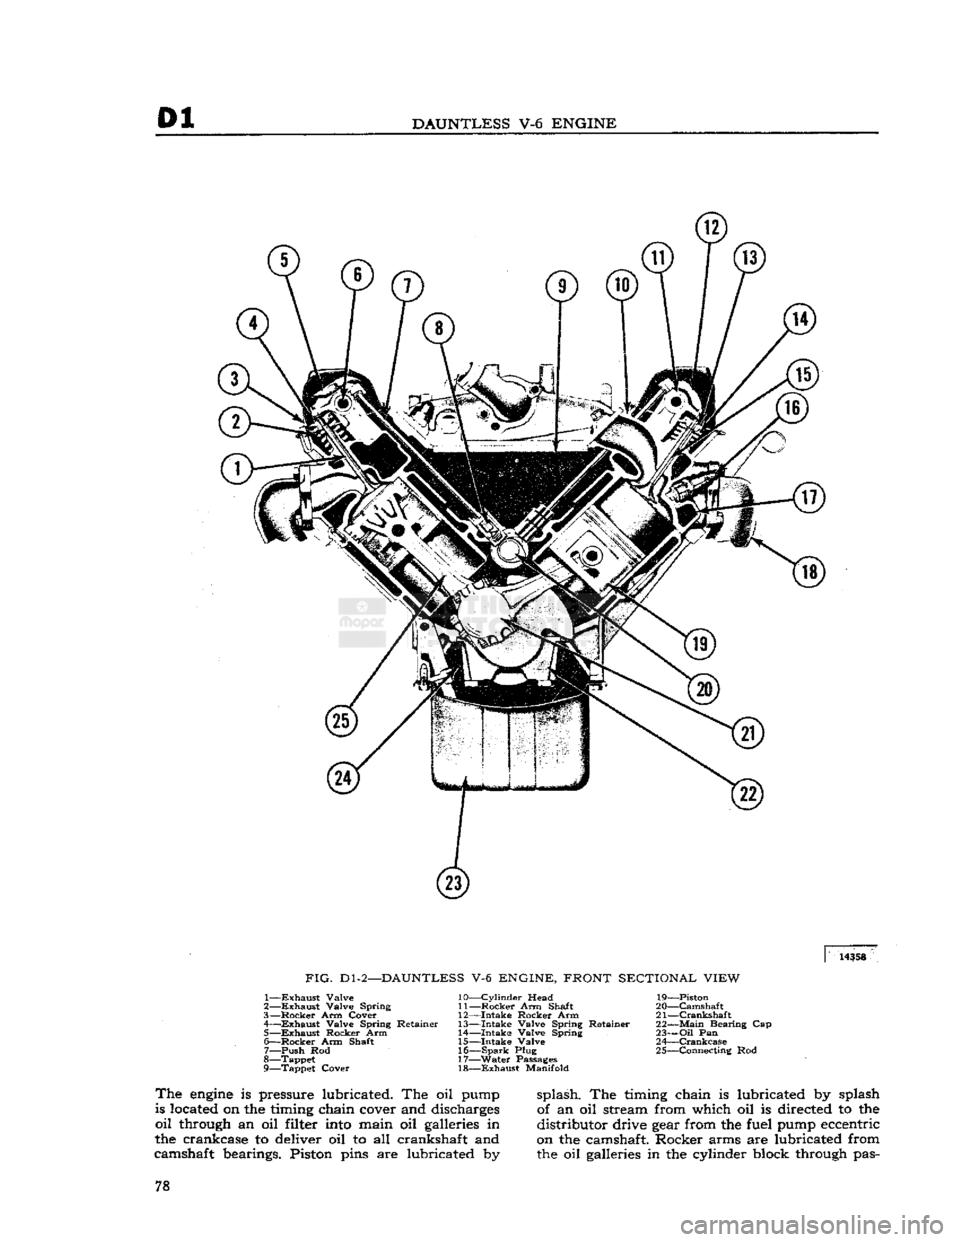 JEEP CJ 1953 Manual PDF 
01 
DAUNTLESS
 V-6
 ENGINE 
 14358 

FIG.
 Dl-2—DAUNTLESS
 V-6
 ENGINE, FRONT SECTIONAL VIEW 

1—
 Exhaust
 Valve 
2—
 Exhaust
 Valve Spring 
3—
 Rocker
 Arm Cover 
4—
 —Exhaust
 Valve Sp